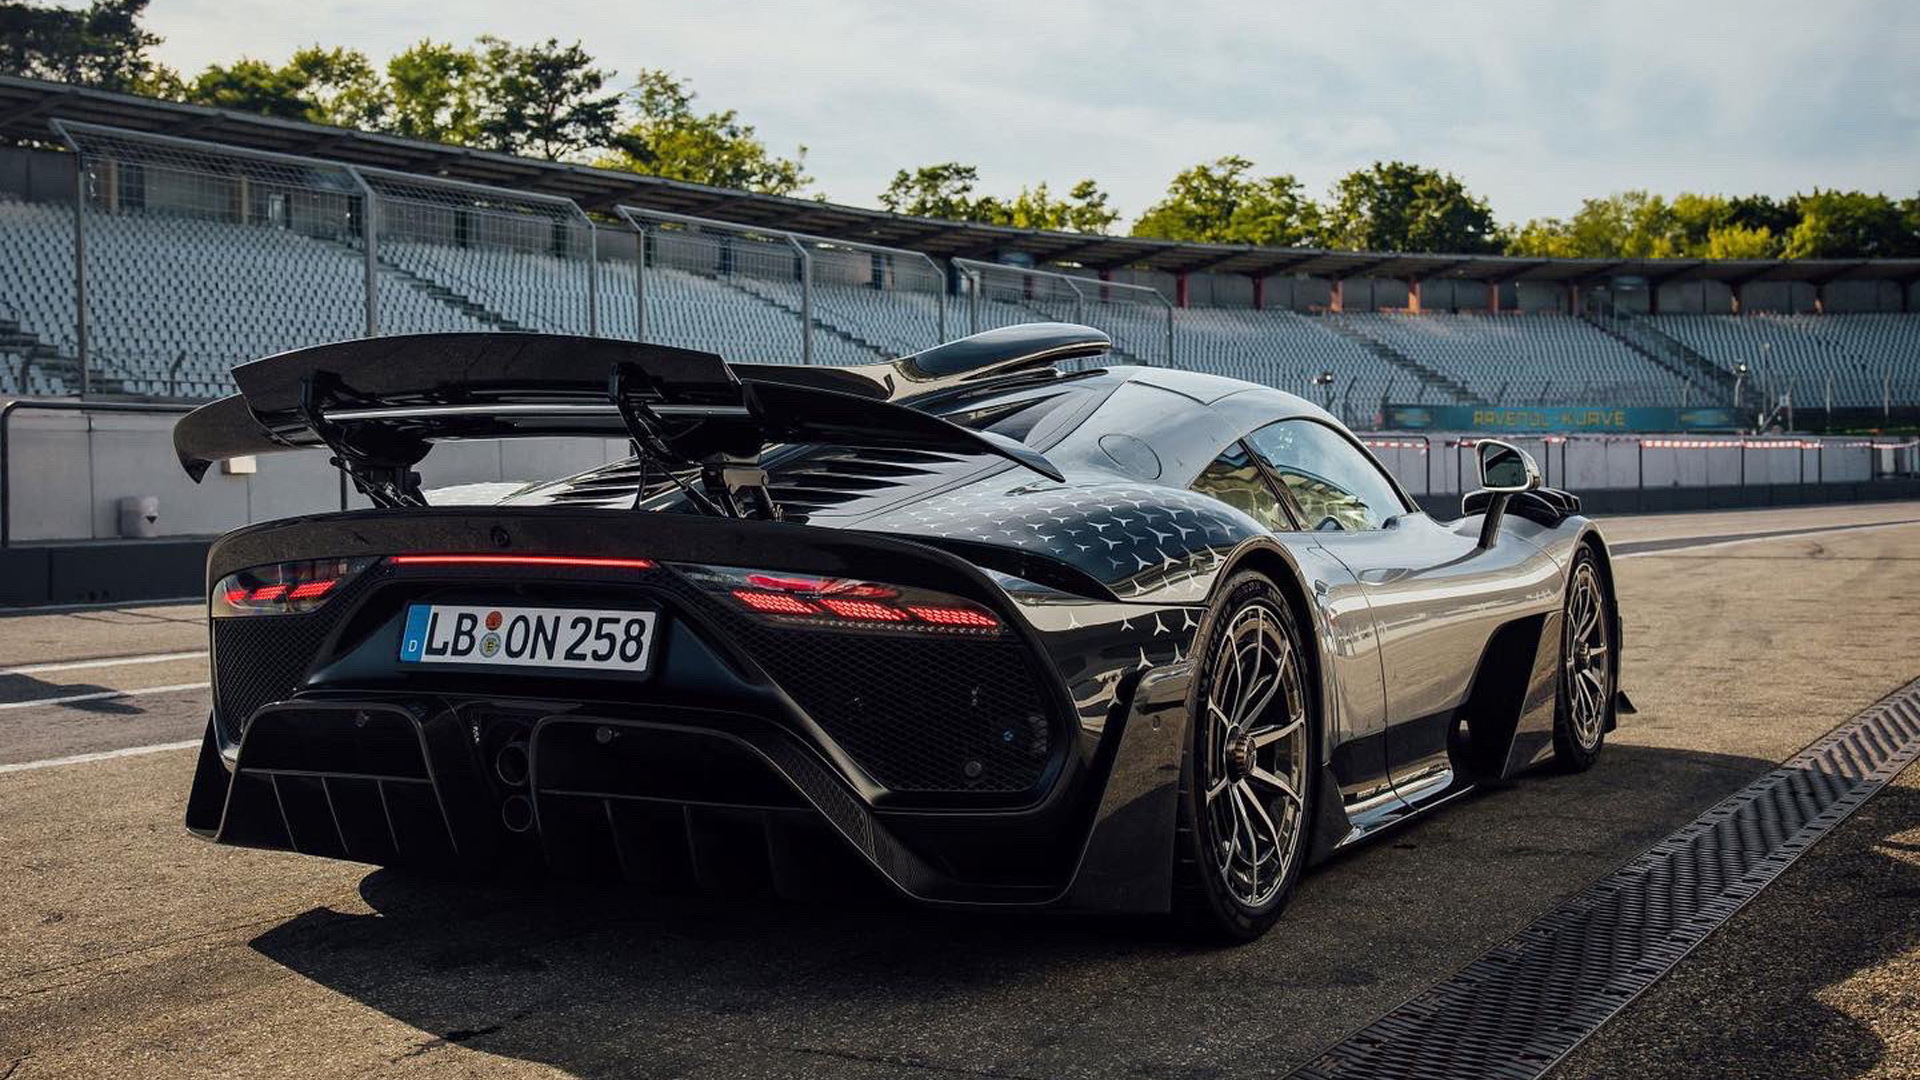 Maro Engel drives the Mercedes-Benz AMG One at the Hockenheimring